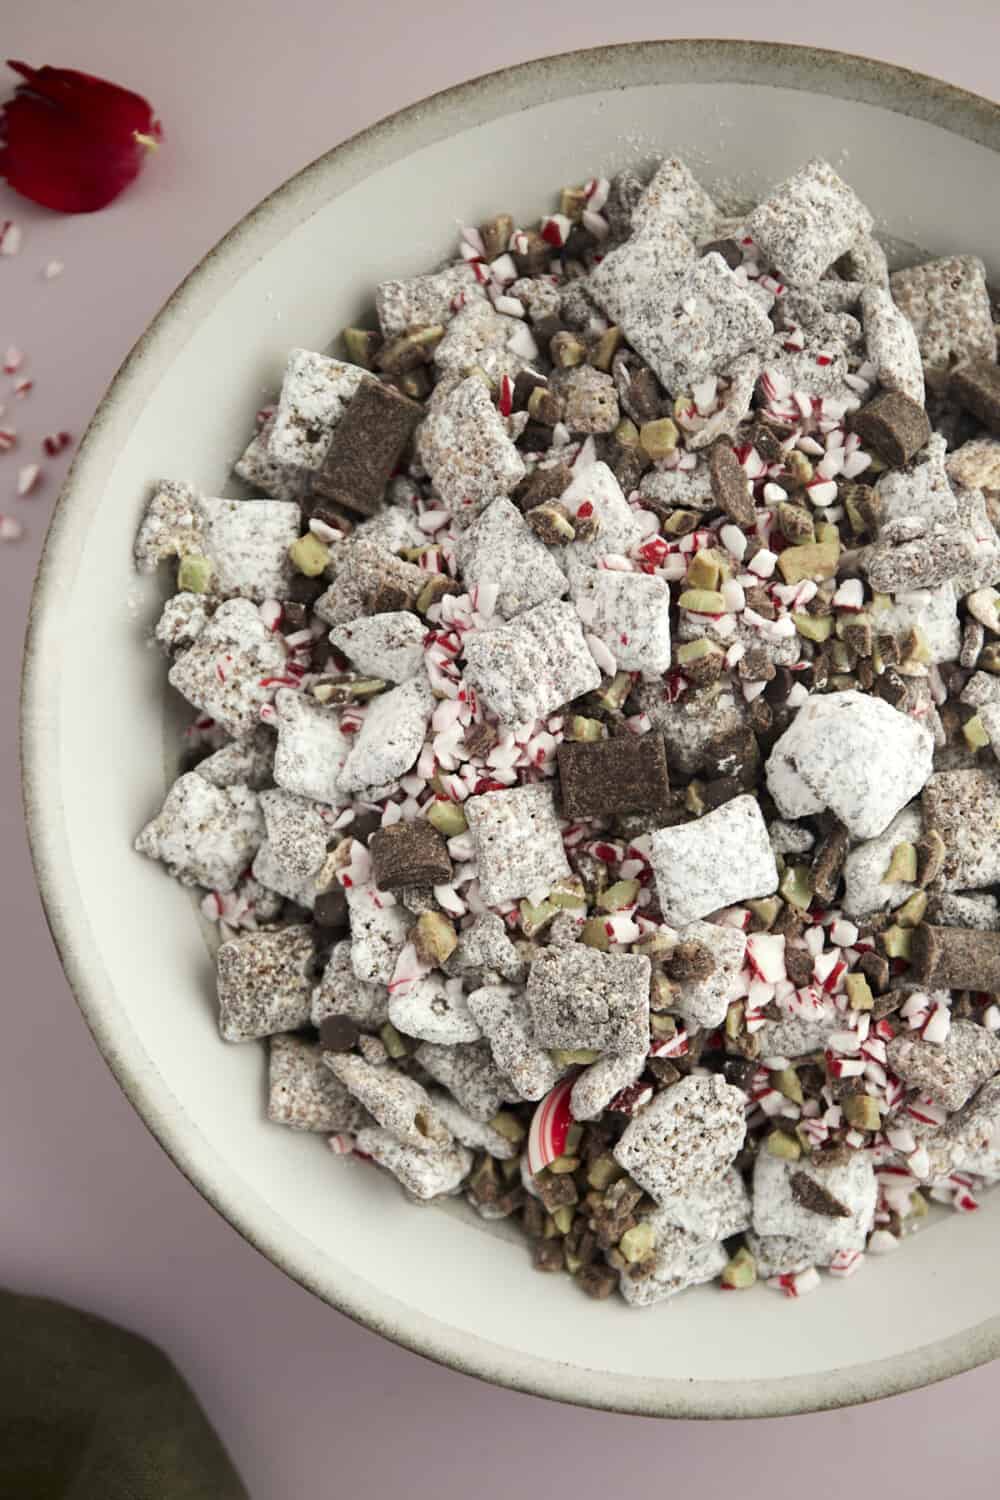 a bowl of Christmas puppy chow with dark chocolate chunks, Andes mints, and peppermint pieces